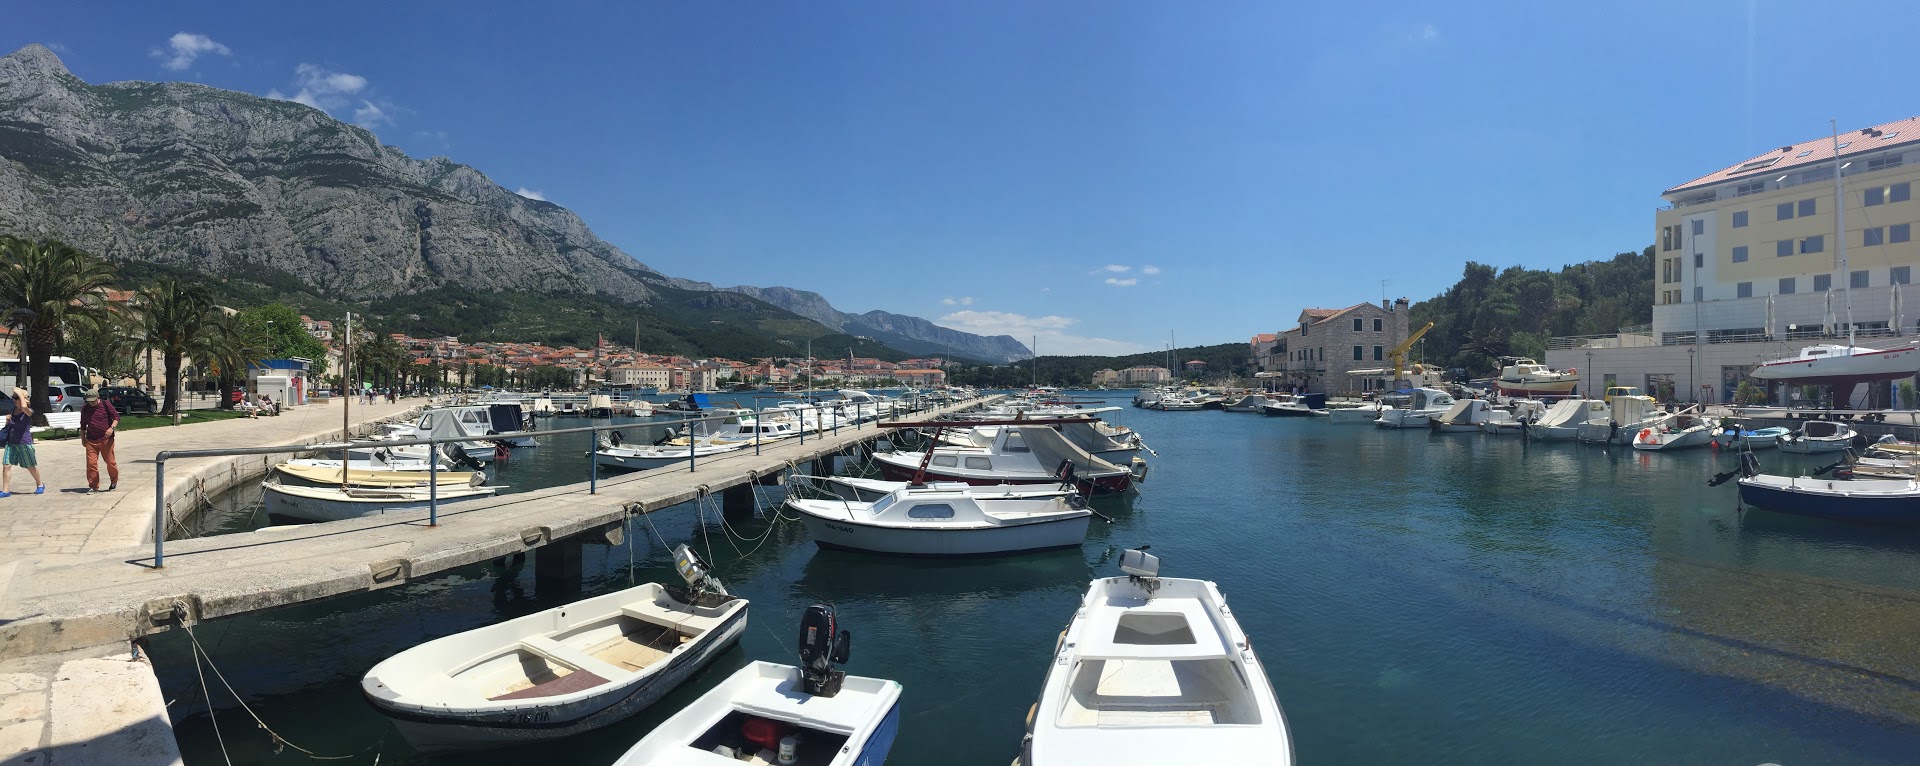 Exceeding my Expectations: Discovering the Dalmatian Coast in Croatia